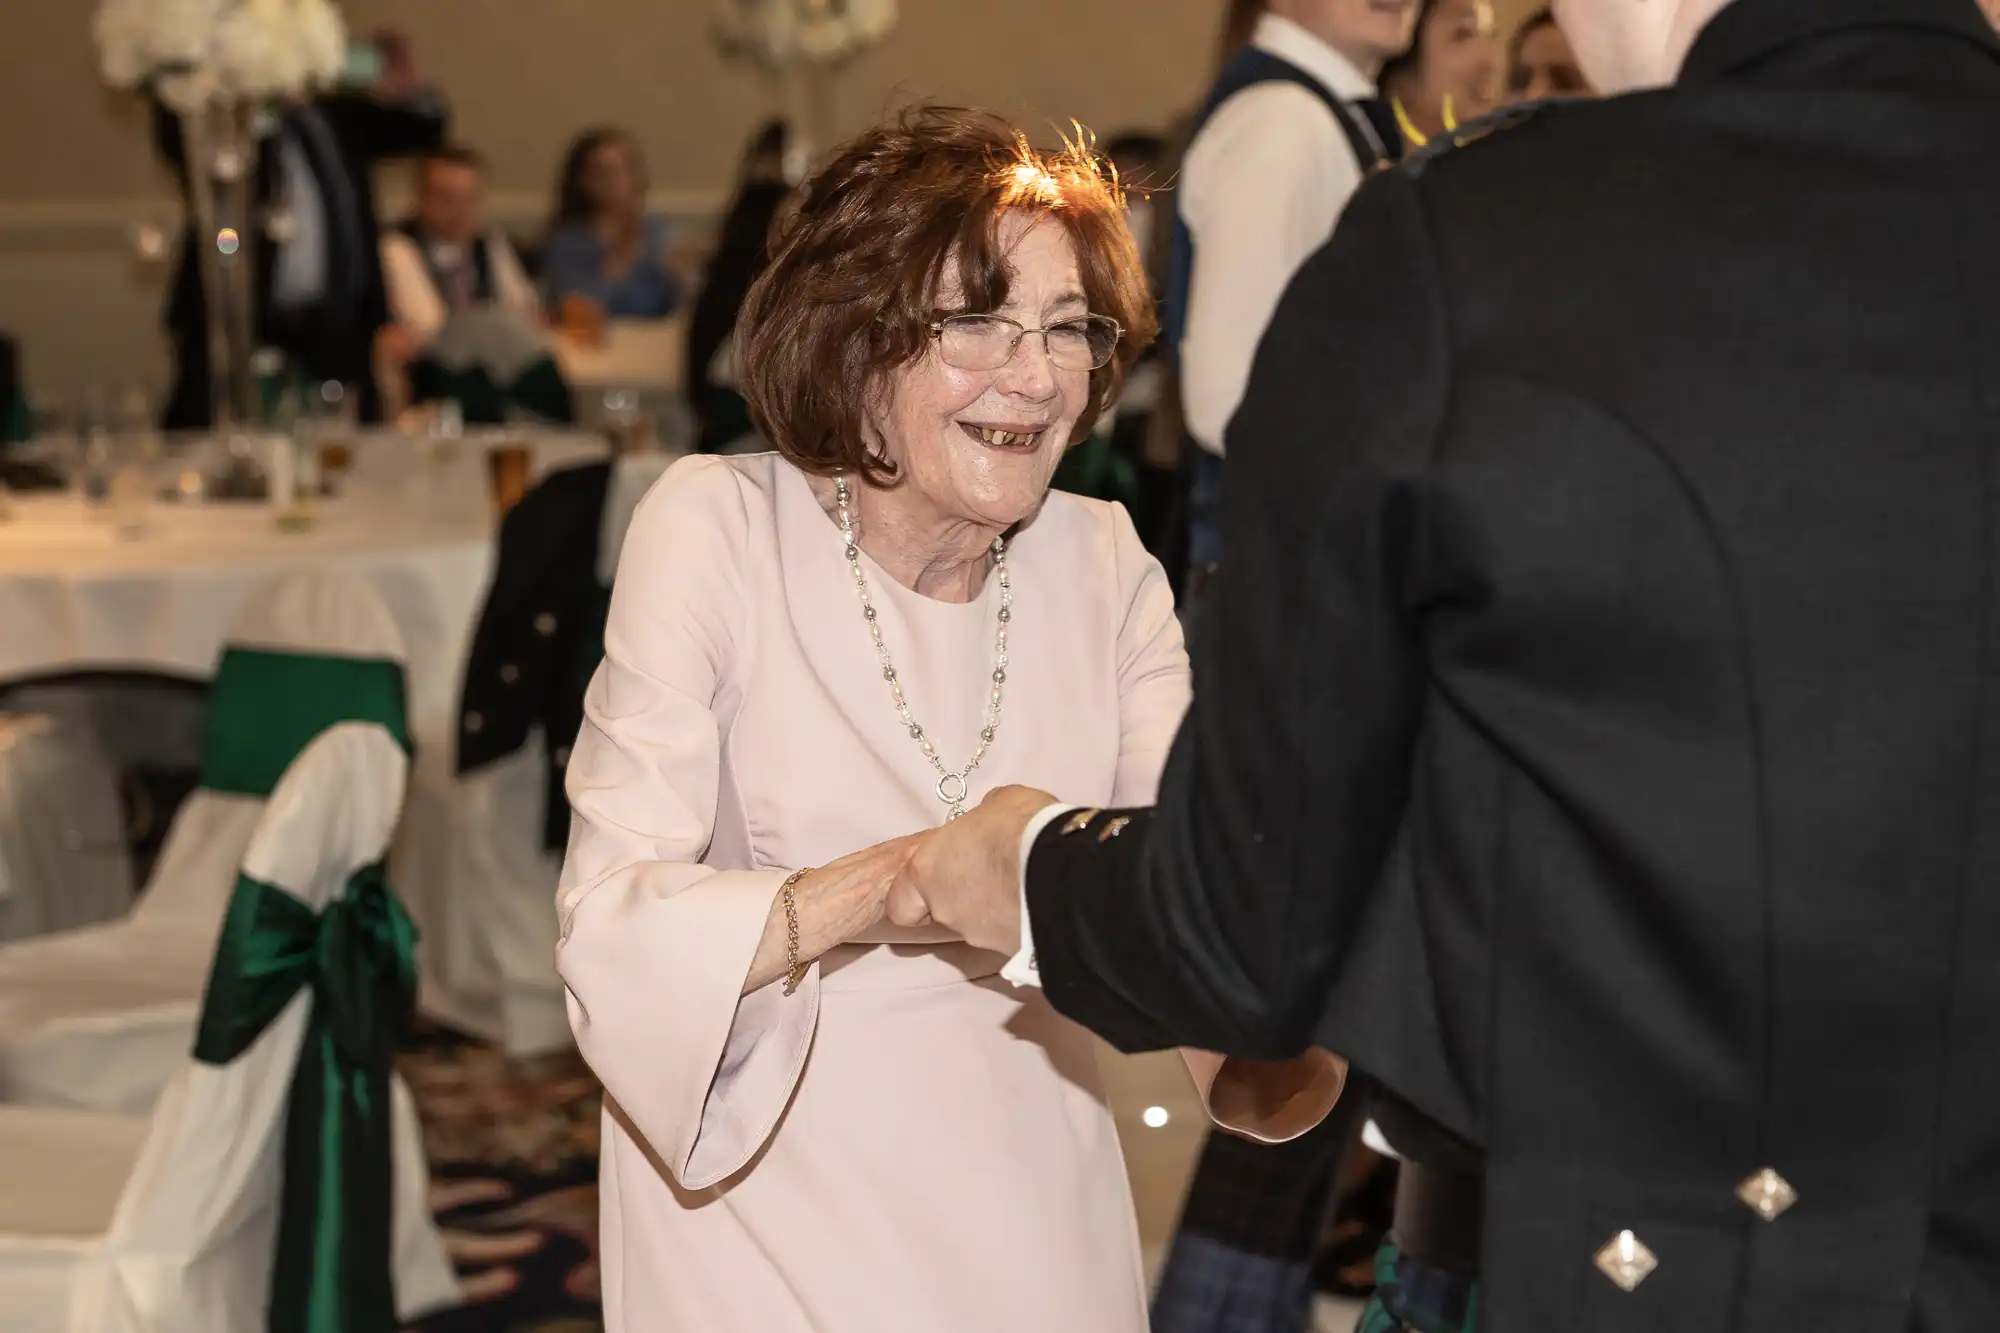 Elderly woman in a pink dress and glasses smiles while shaking hands with a man in a dark suit at a festive event.